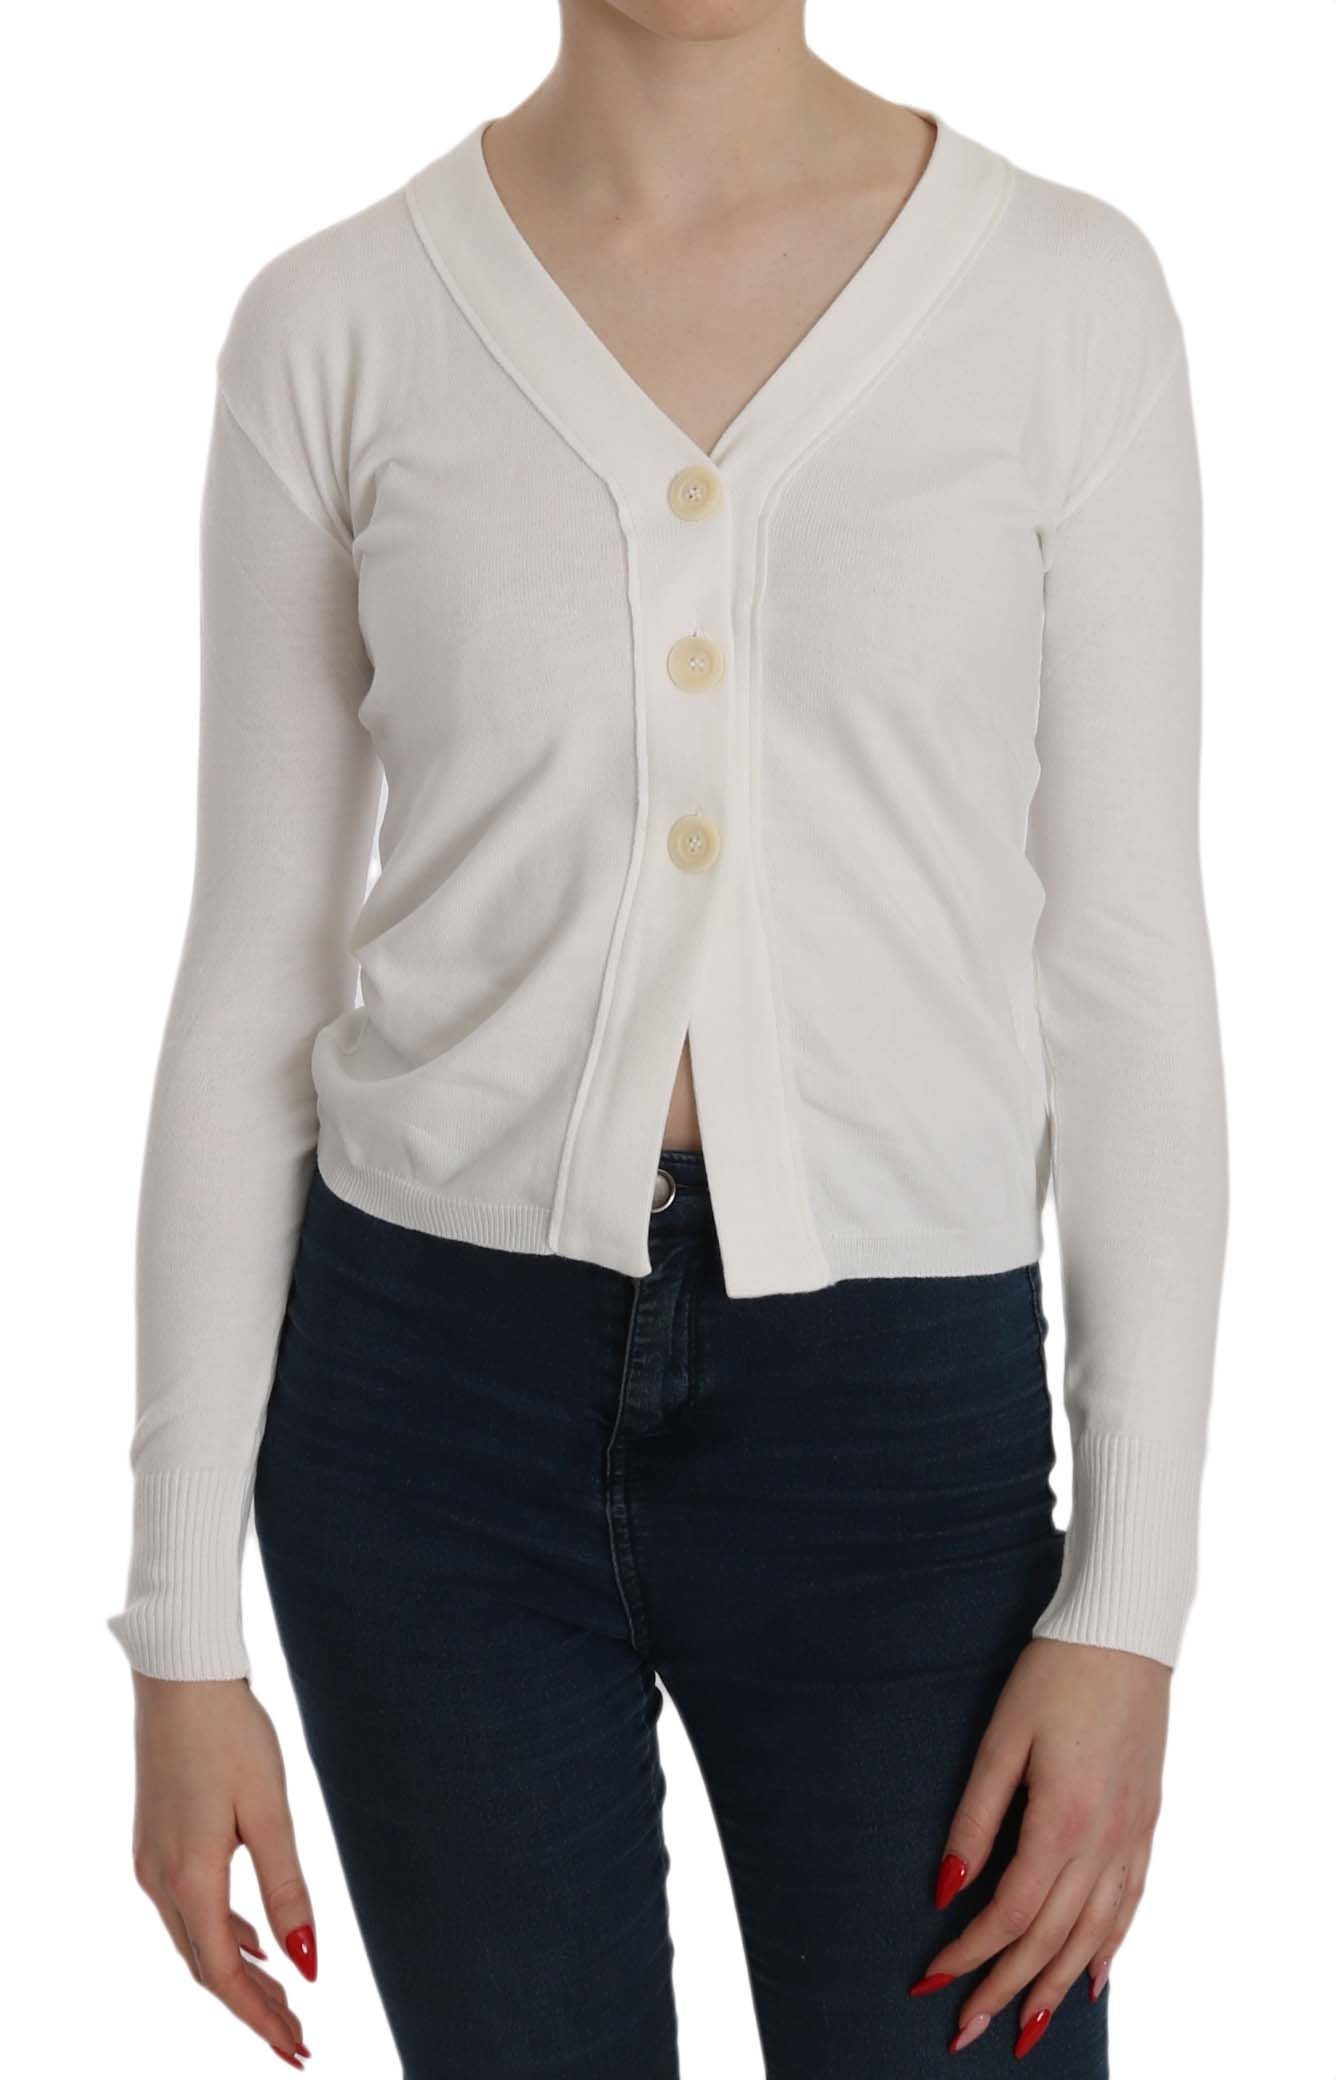 Byblos Women's White V-neck Long Sleeve Cropped Cardigan Tops Sweater - Designed by BYBLOS Available to Buy at a Discounted Price on Moon Behind The Hill Online Designer Discount Store